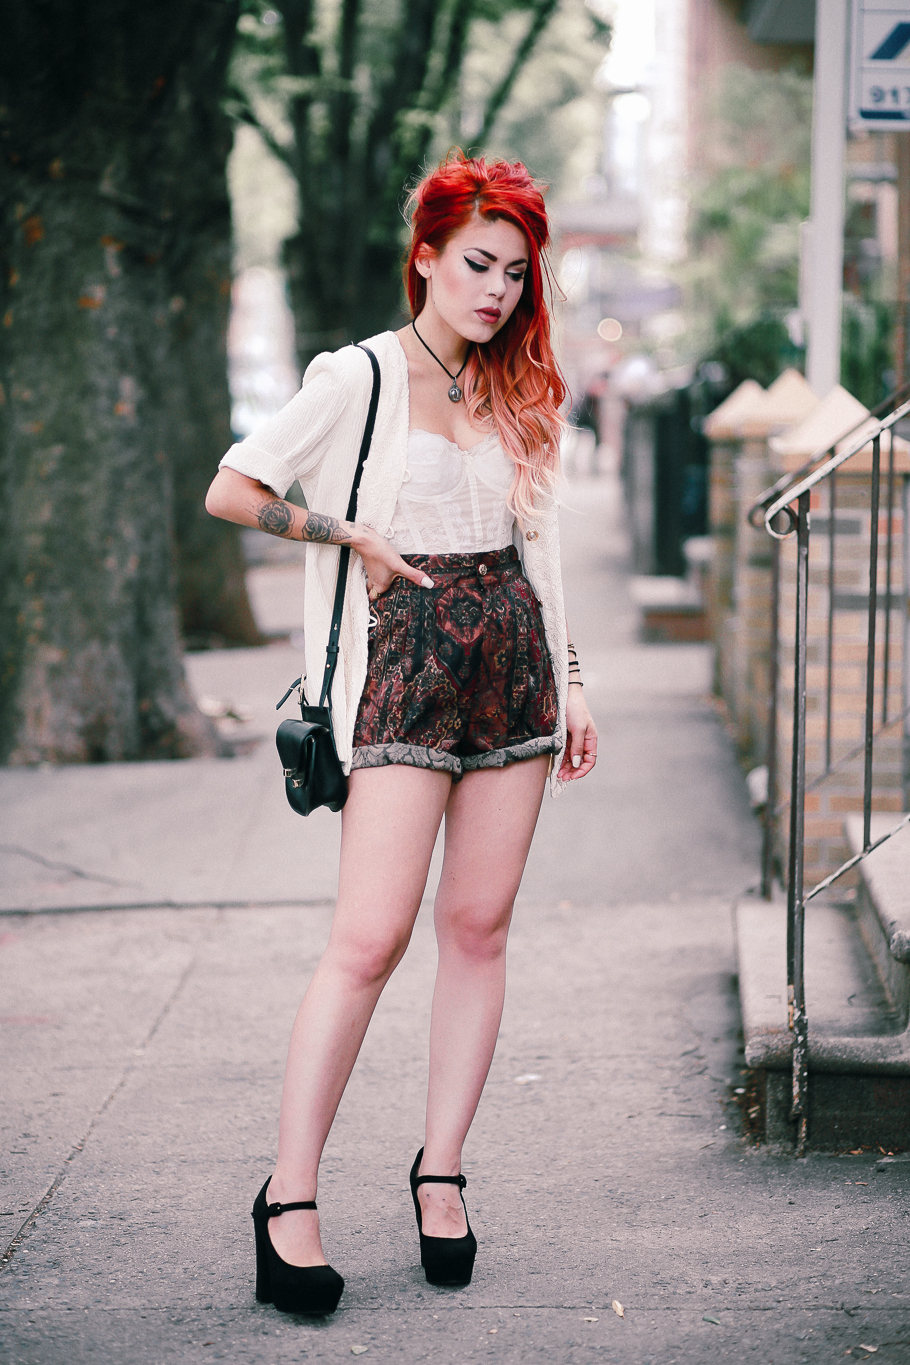 Le Happy wearing vintage shorts and white lace bustier